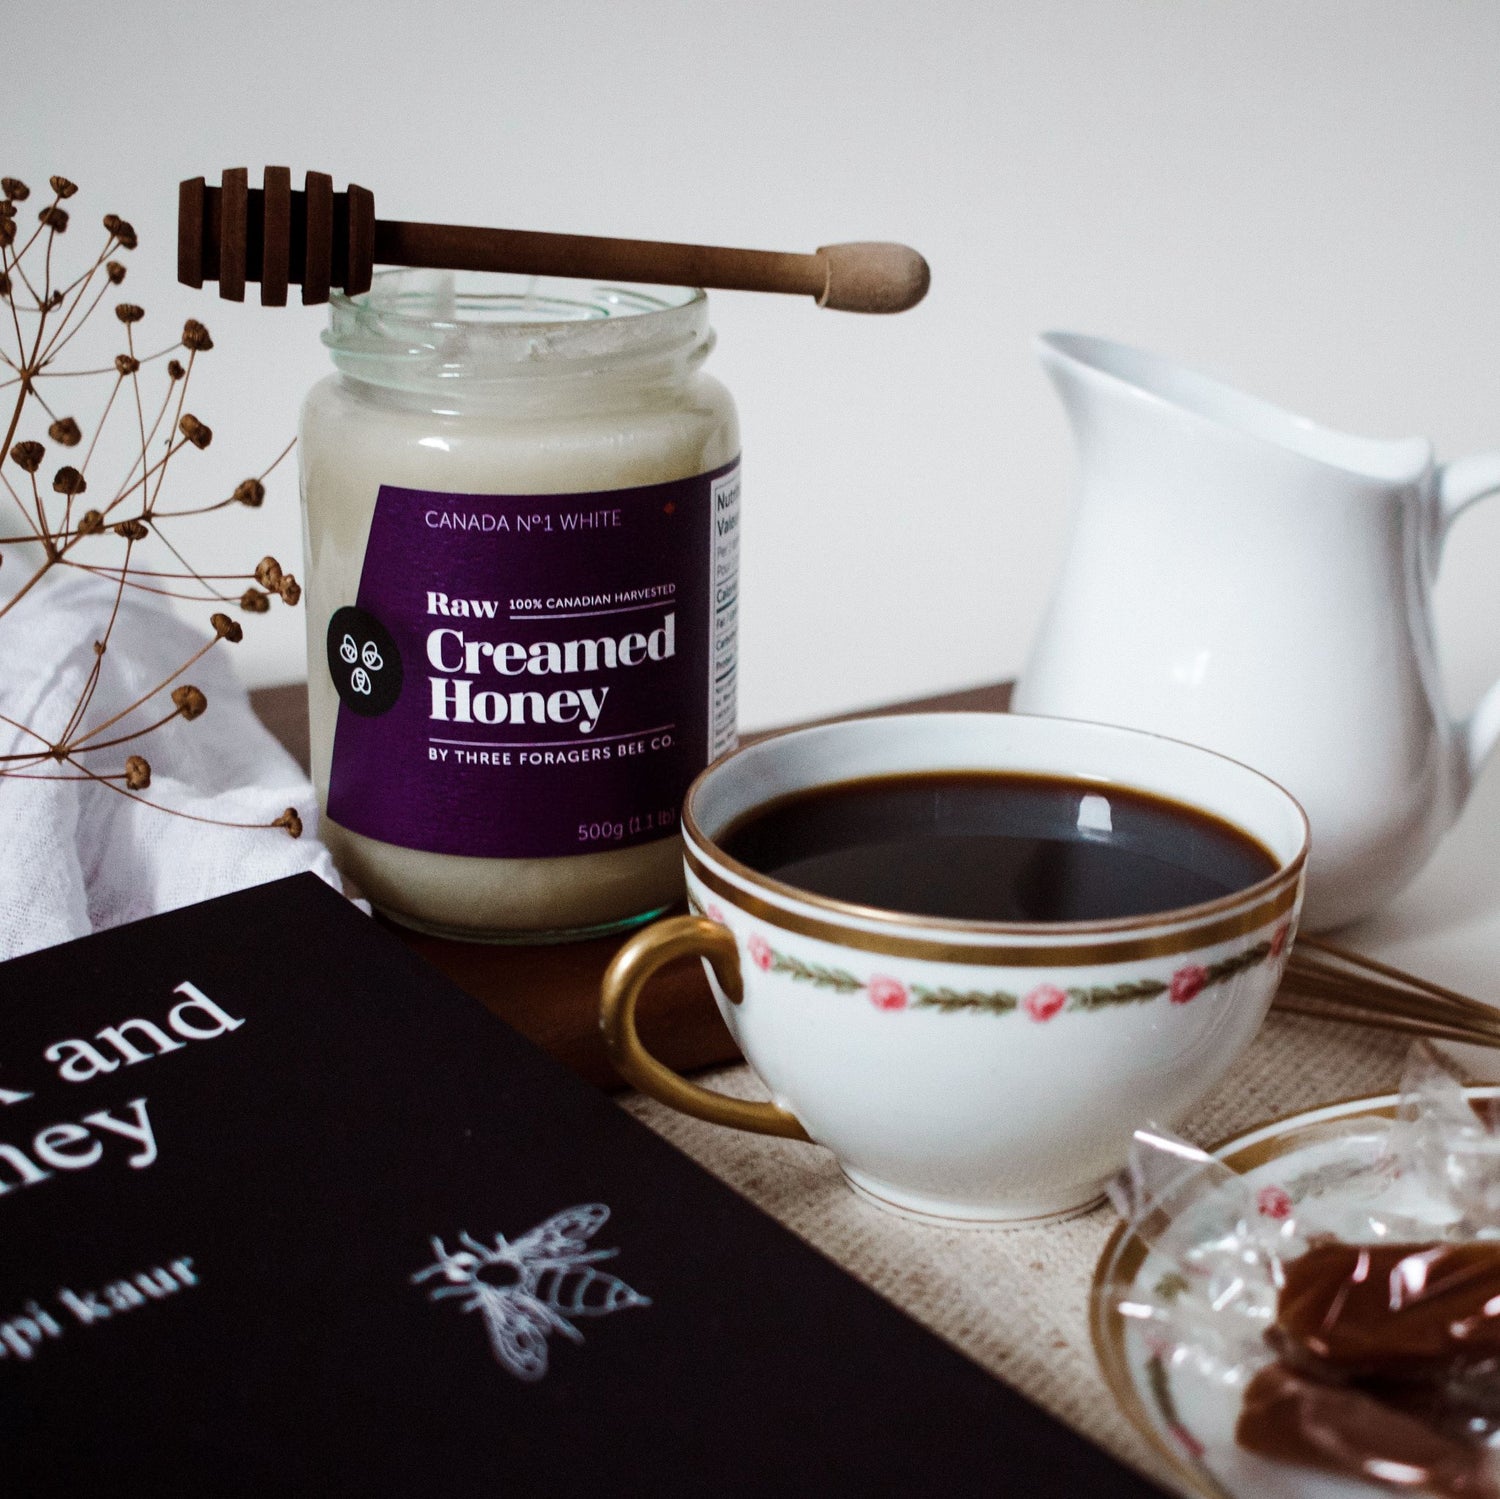 Three Foragers Raw Honey and a cup of coffee